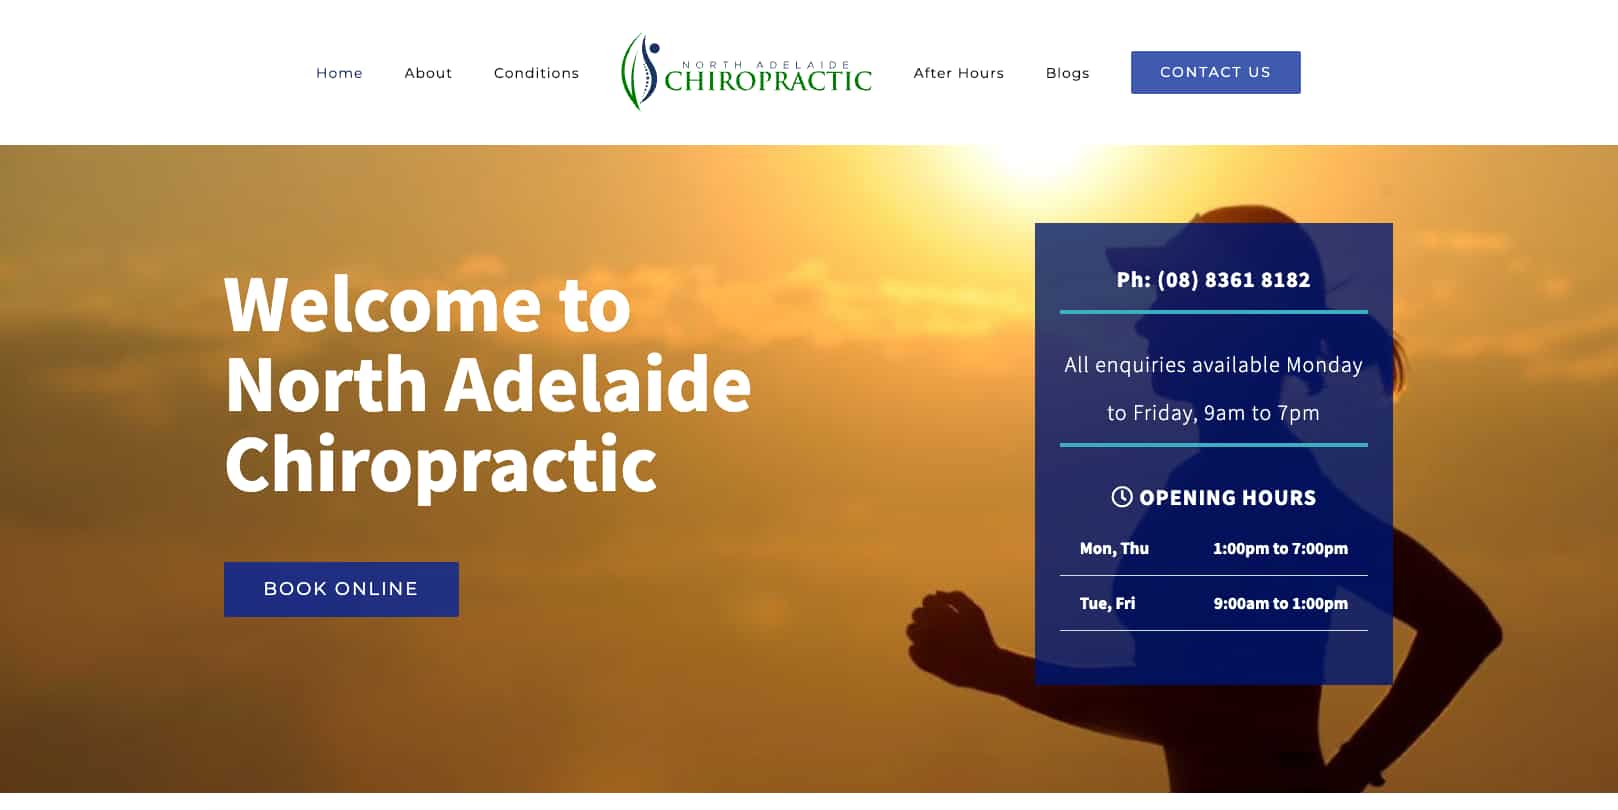 North Adelaide Chiropractic